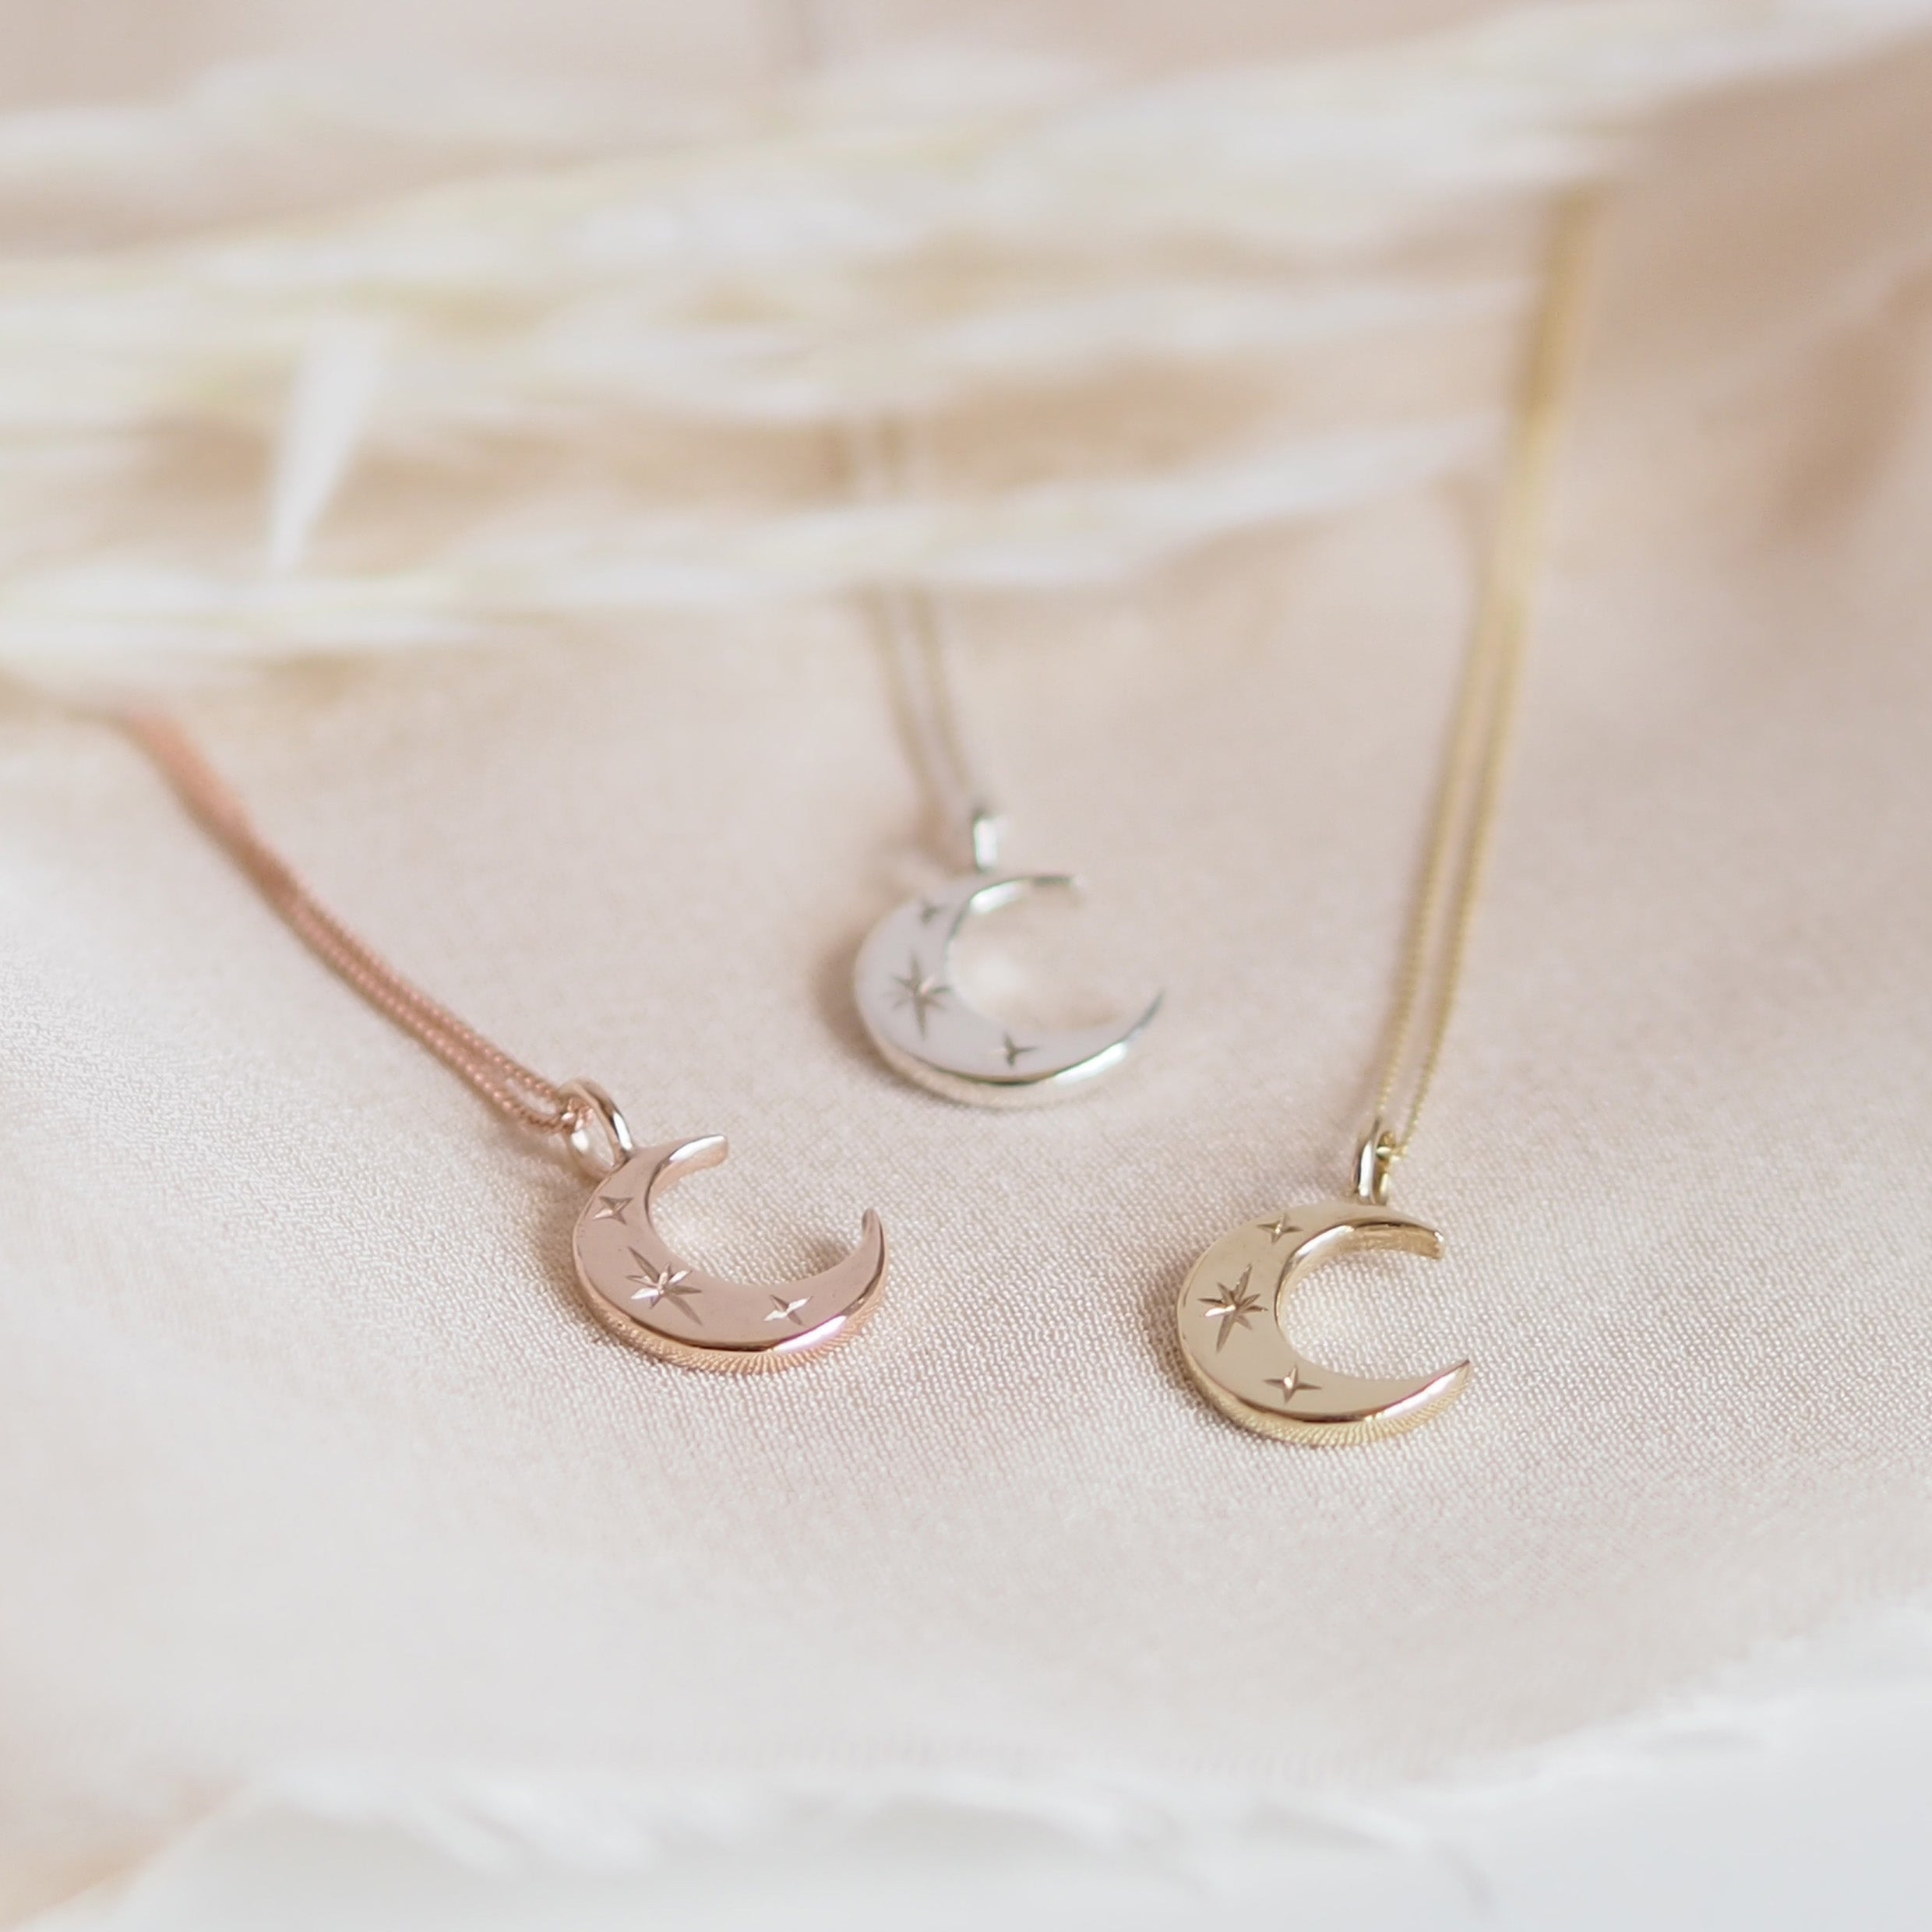 Crescent Moon Necklace in Solid 9ct Gold